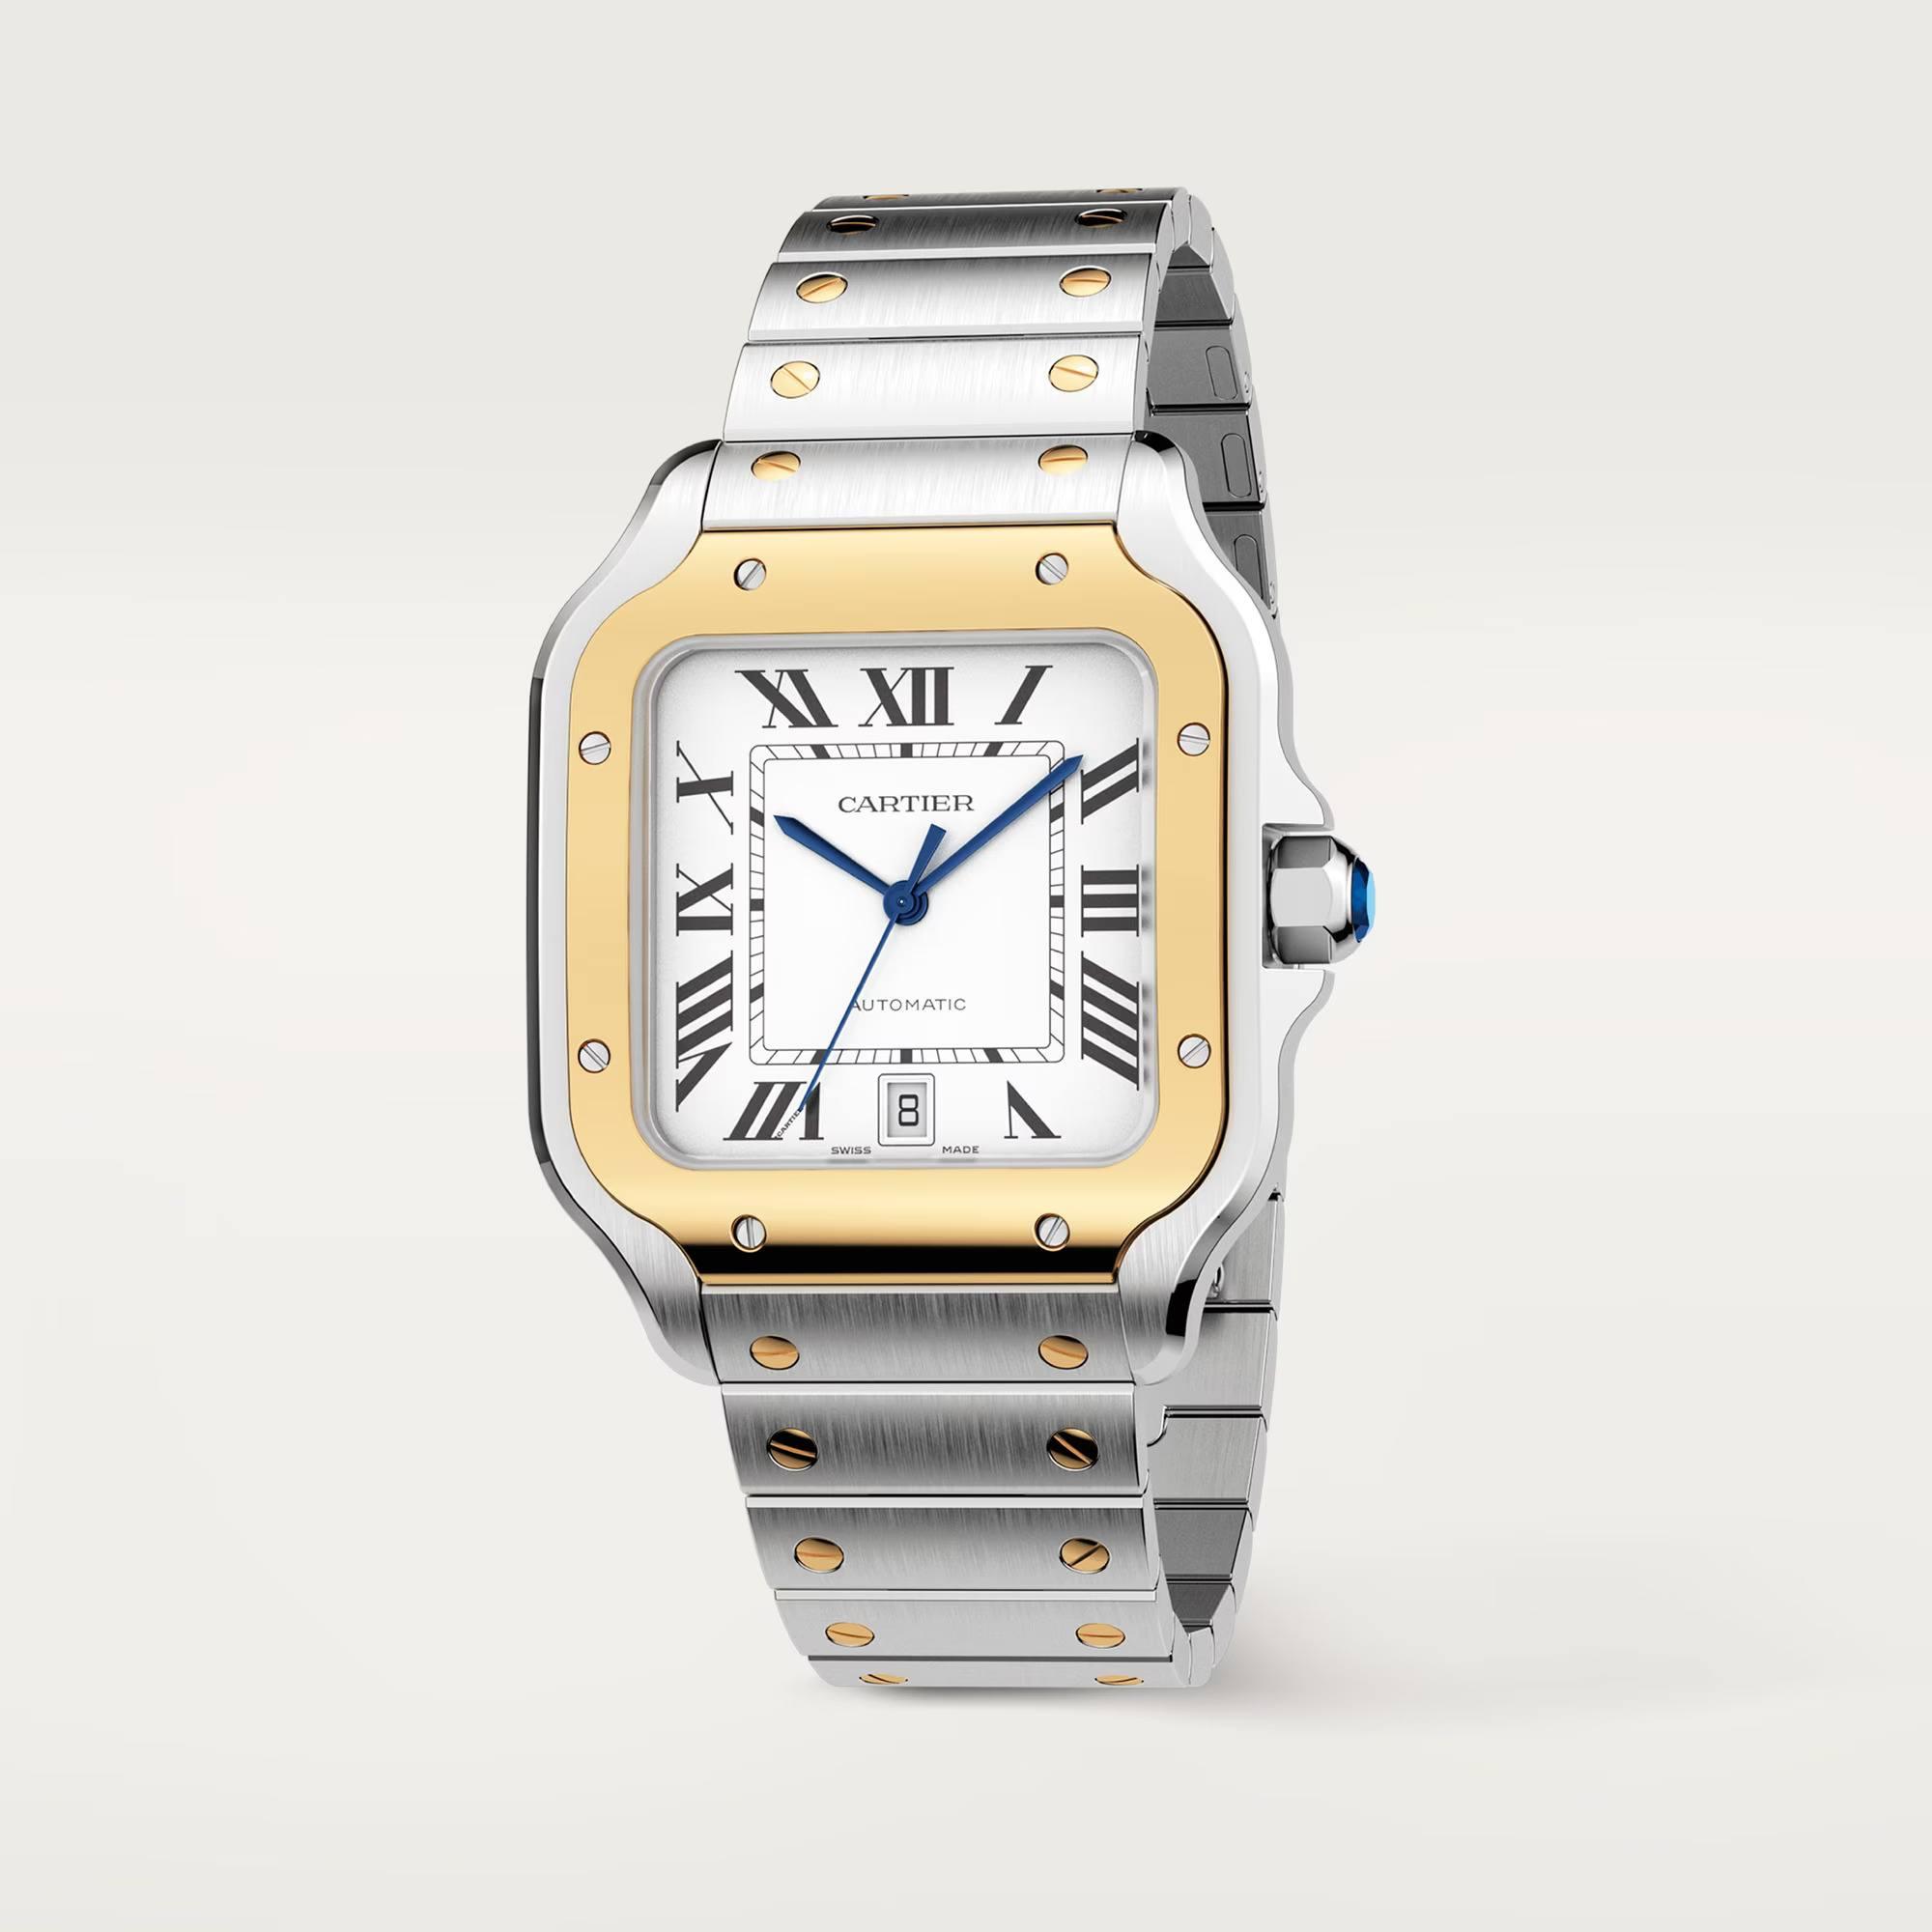 Santos de Cartier Watch with Yellow Gold, large model 10